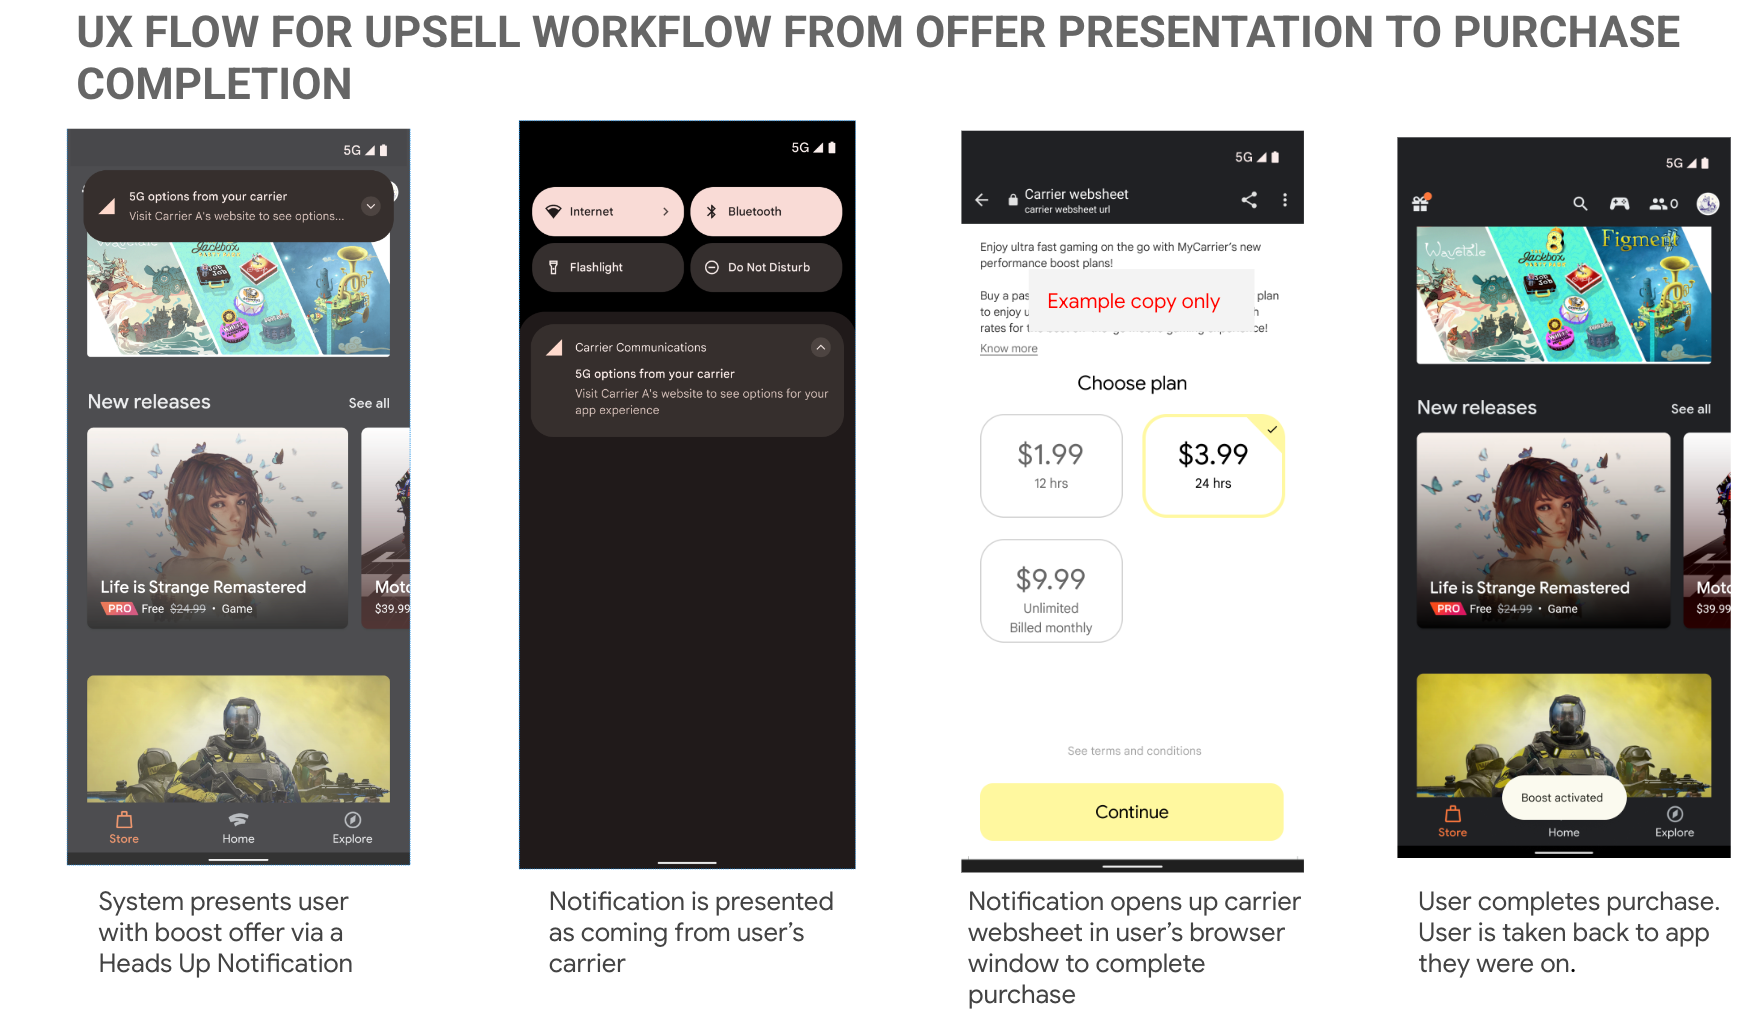 The UX flow shows the user a notification that opens up a carrier
       websheet where they can complete the purchase.